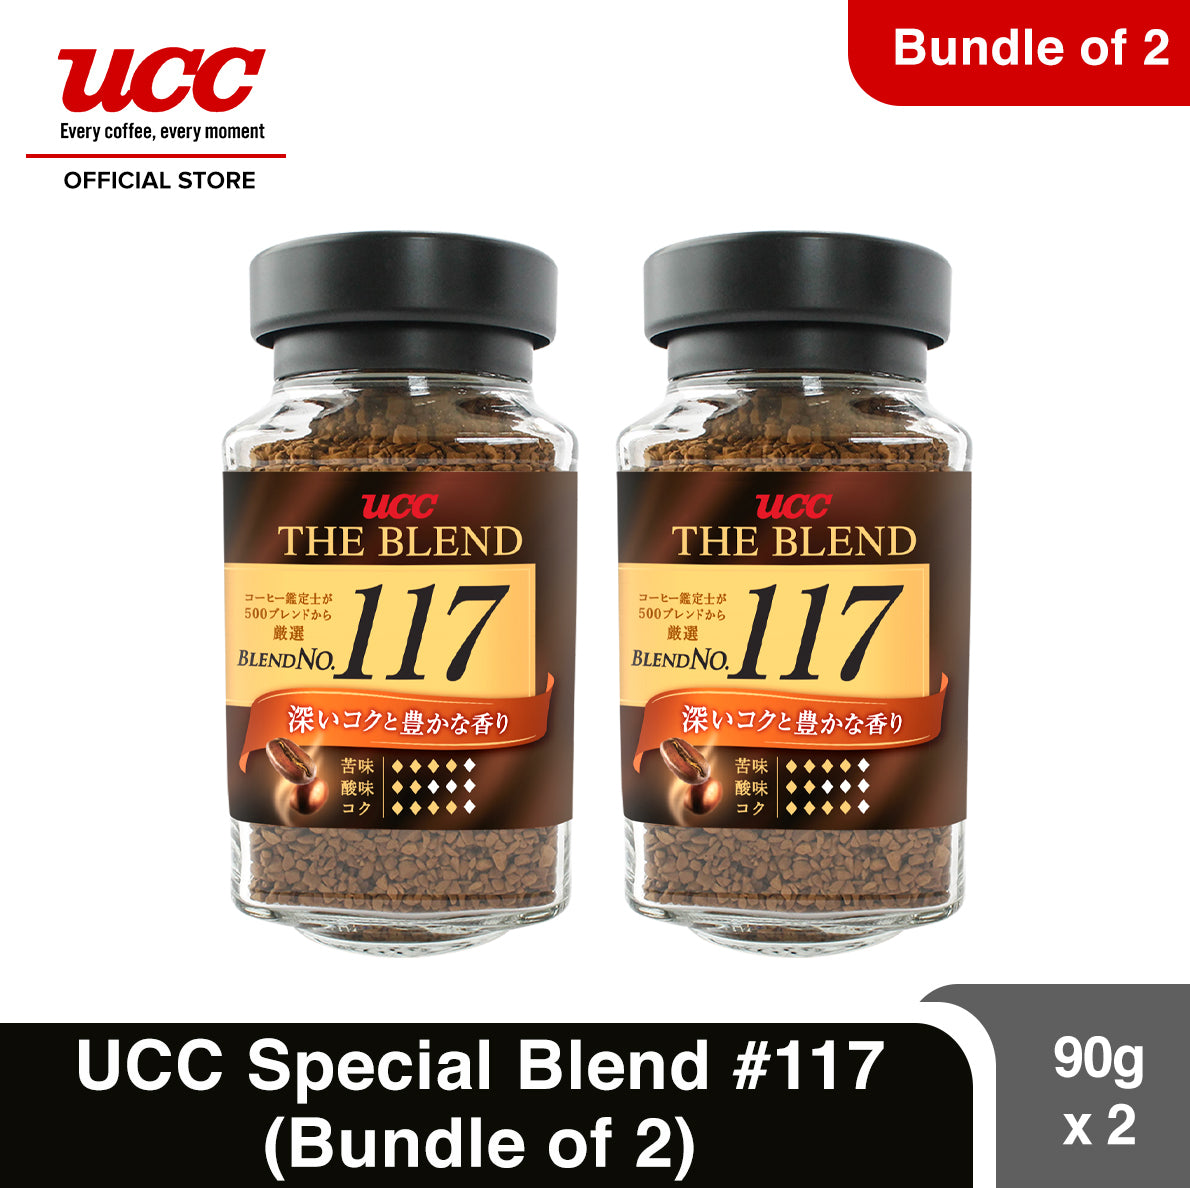 UCC Special Blend #117 (Bundle of 2) 90g x 2